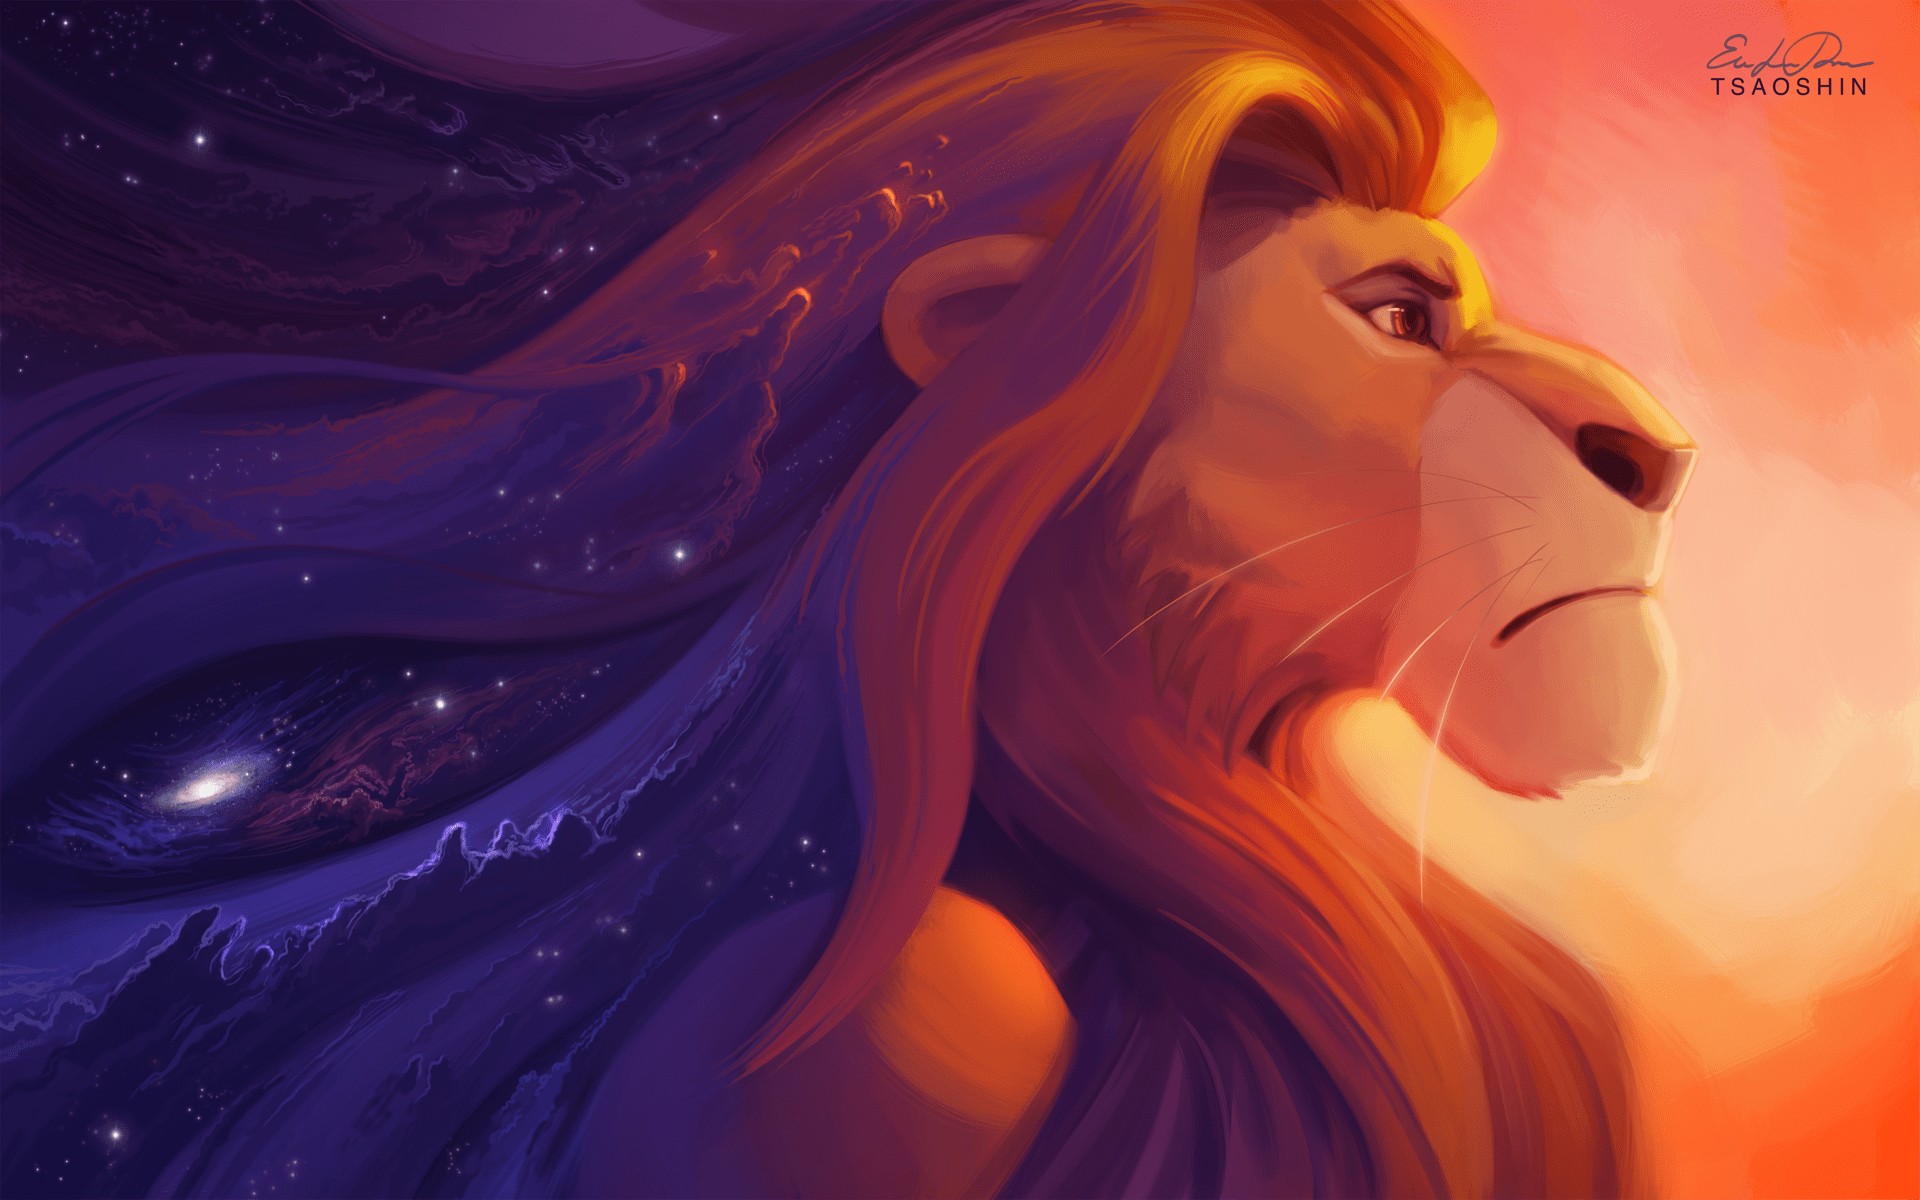 HD wallpaper lion atop a stone illustration the sky rock The moon mane   Wallpaper Flare